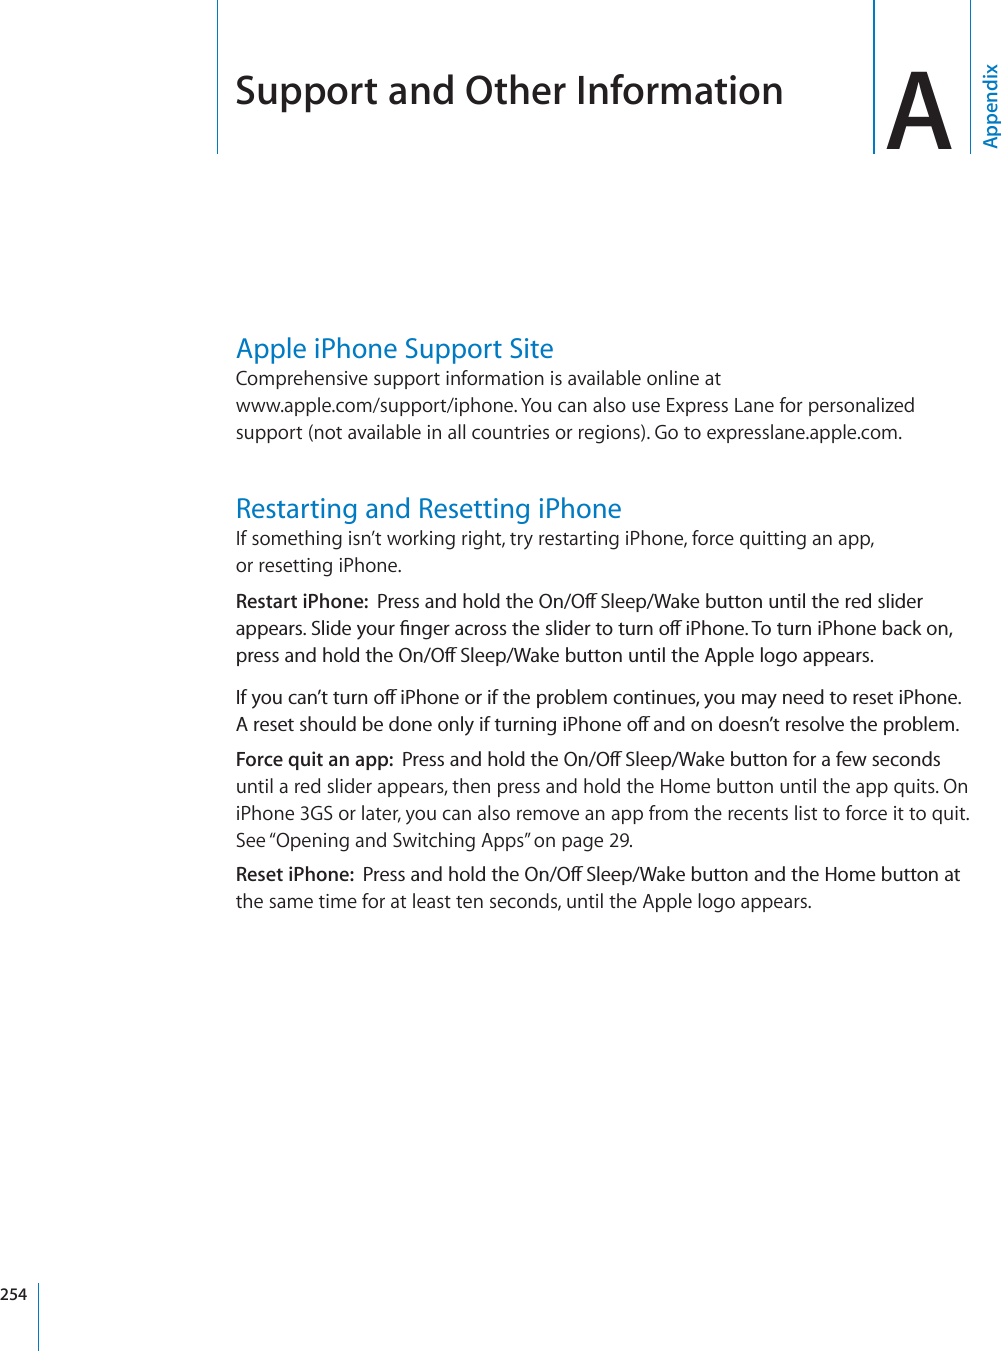 Support and Other Information AAppendixApple iPhone Support SiteComprehensive support information is available online at www.apple.com/support/iphone. You can also use Express Lane for personalized support (not available in all countries or regions). Go to expresslane.apple.com.Restarting and Resetting iPhoneIf something isn’t working right, try restarting iPhone, force quitting an app, or resetting iPhone.Restart iPhone: 2TGUUCPFJQNFVJG1P1Ò5NGGR9CMGDWVVQPWPVKNVJGTGFUNKFGTCRRGCTU5NKFG[QWT°PIGTCETQUUVJGUNKFGTVQVWTPQÒK2JQPG6QVWTPK2JQPGDCEMQPRTGUUCPFJQNFVJG1P1Ò5NGGR9CMGDWVVQPWPVKNVJG#RRNGNQIQCRRGCTU+H[QWECP¨VVWTPQÒK2JQPGQTKHVJGRTQDNGOEQPVKPWGU[QWOC[PGGFVQTGUGVK2JQPG#TGUGVUJQWNFDGFQPGQPN[KHVWTPKPIK2JQPGQÒCPFQPFQGUP¨VTGUQNXGVJGRTQDNGOForce quit an app: 2TGUUCPFJQNFVJG1P1Ò5NGGR9CMGDWVVQPHQTCHGYUGEQPFUuntil a red slider appears, then press and hold the Home button until the app quits. On iPhone 3GS or later, you can also remove an app from the recents list to force it to quit. See “Opening and Switching Apps” on page 29.Reset iPhone: 2TGUUCPFJQNFVJG1P1Ò5NGGR9CMGDWVVQPCPFVJG*QOGDWVVQPCVthe same time for at least ten seconds, until the Apple logo appears.254